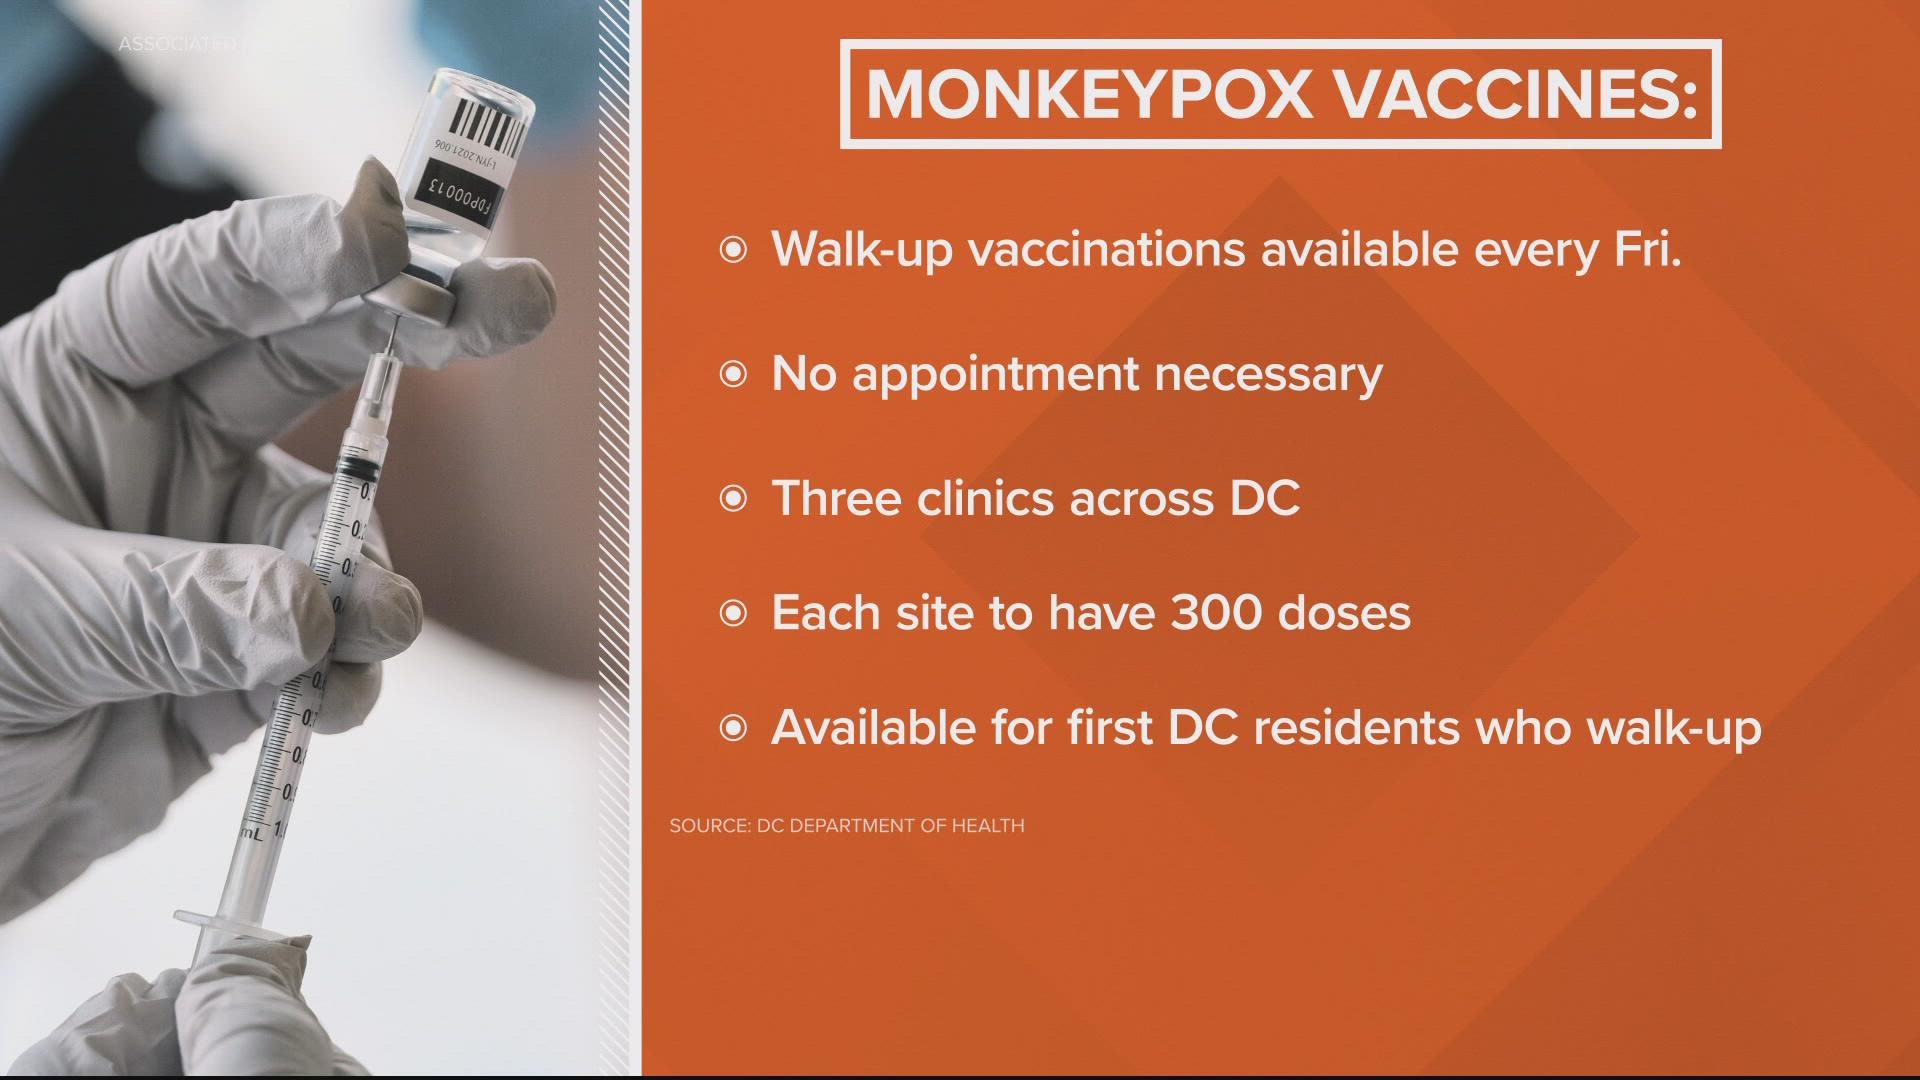 DC is offering walk-up vaccinations without appointments every Friday to residents who are eligible for the shot.